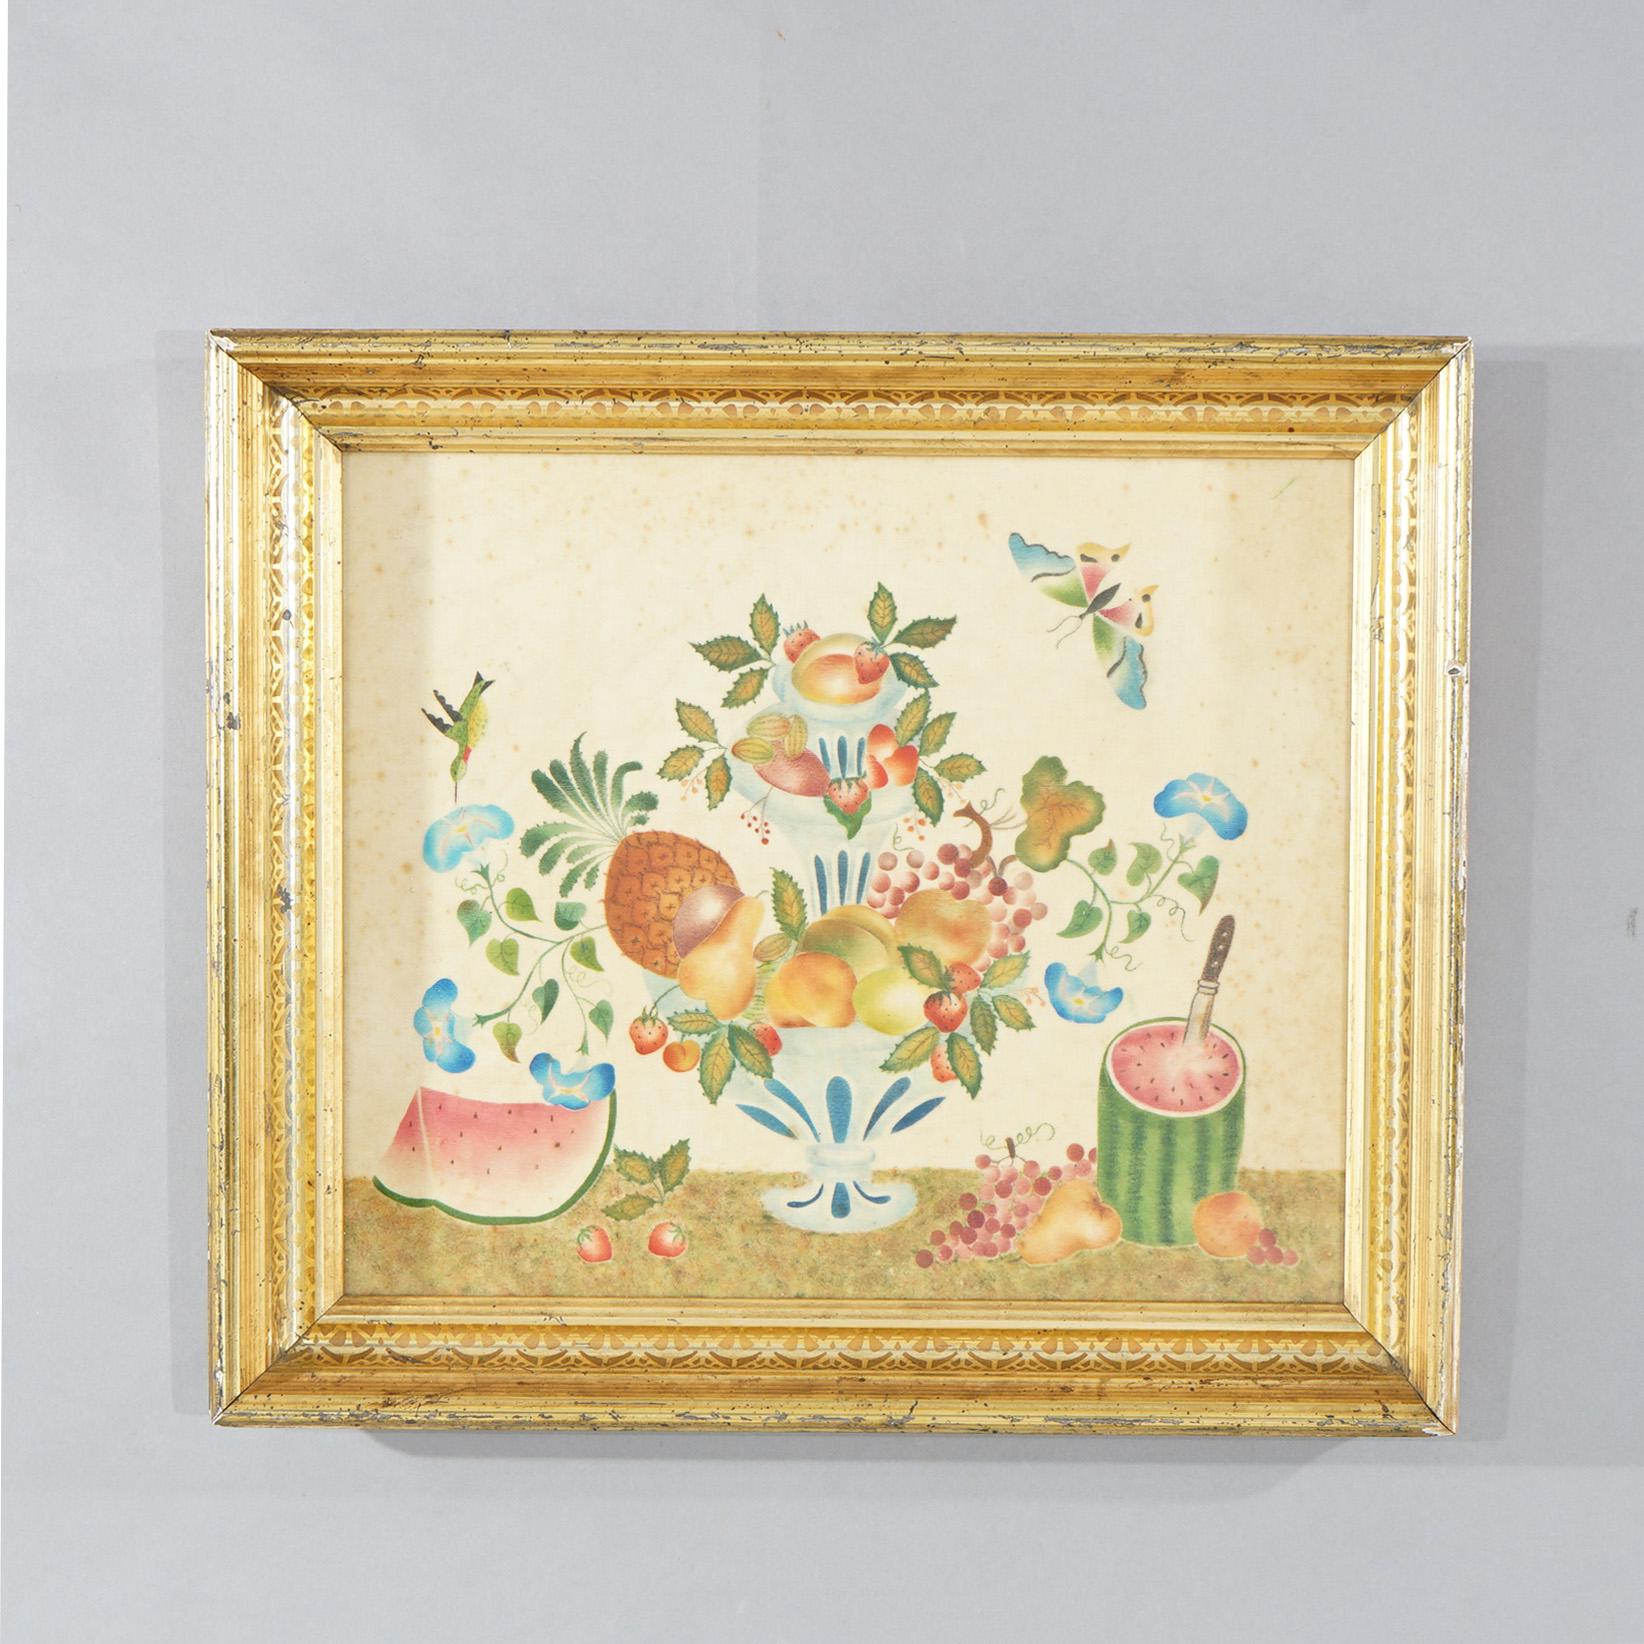 An antique Victorian theorem offers still life of fruit with butterflies and hummingbird, c1850

Measures - 17.5